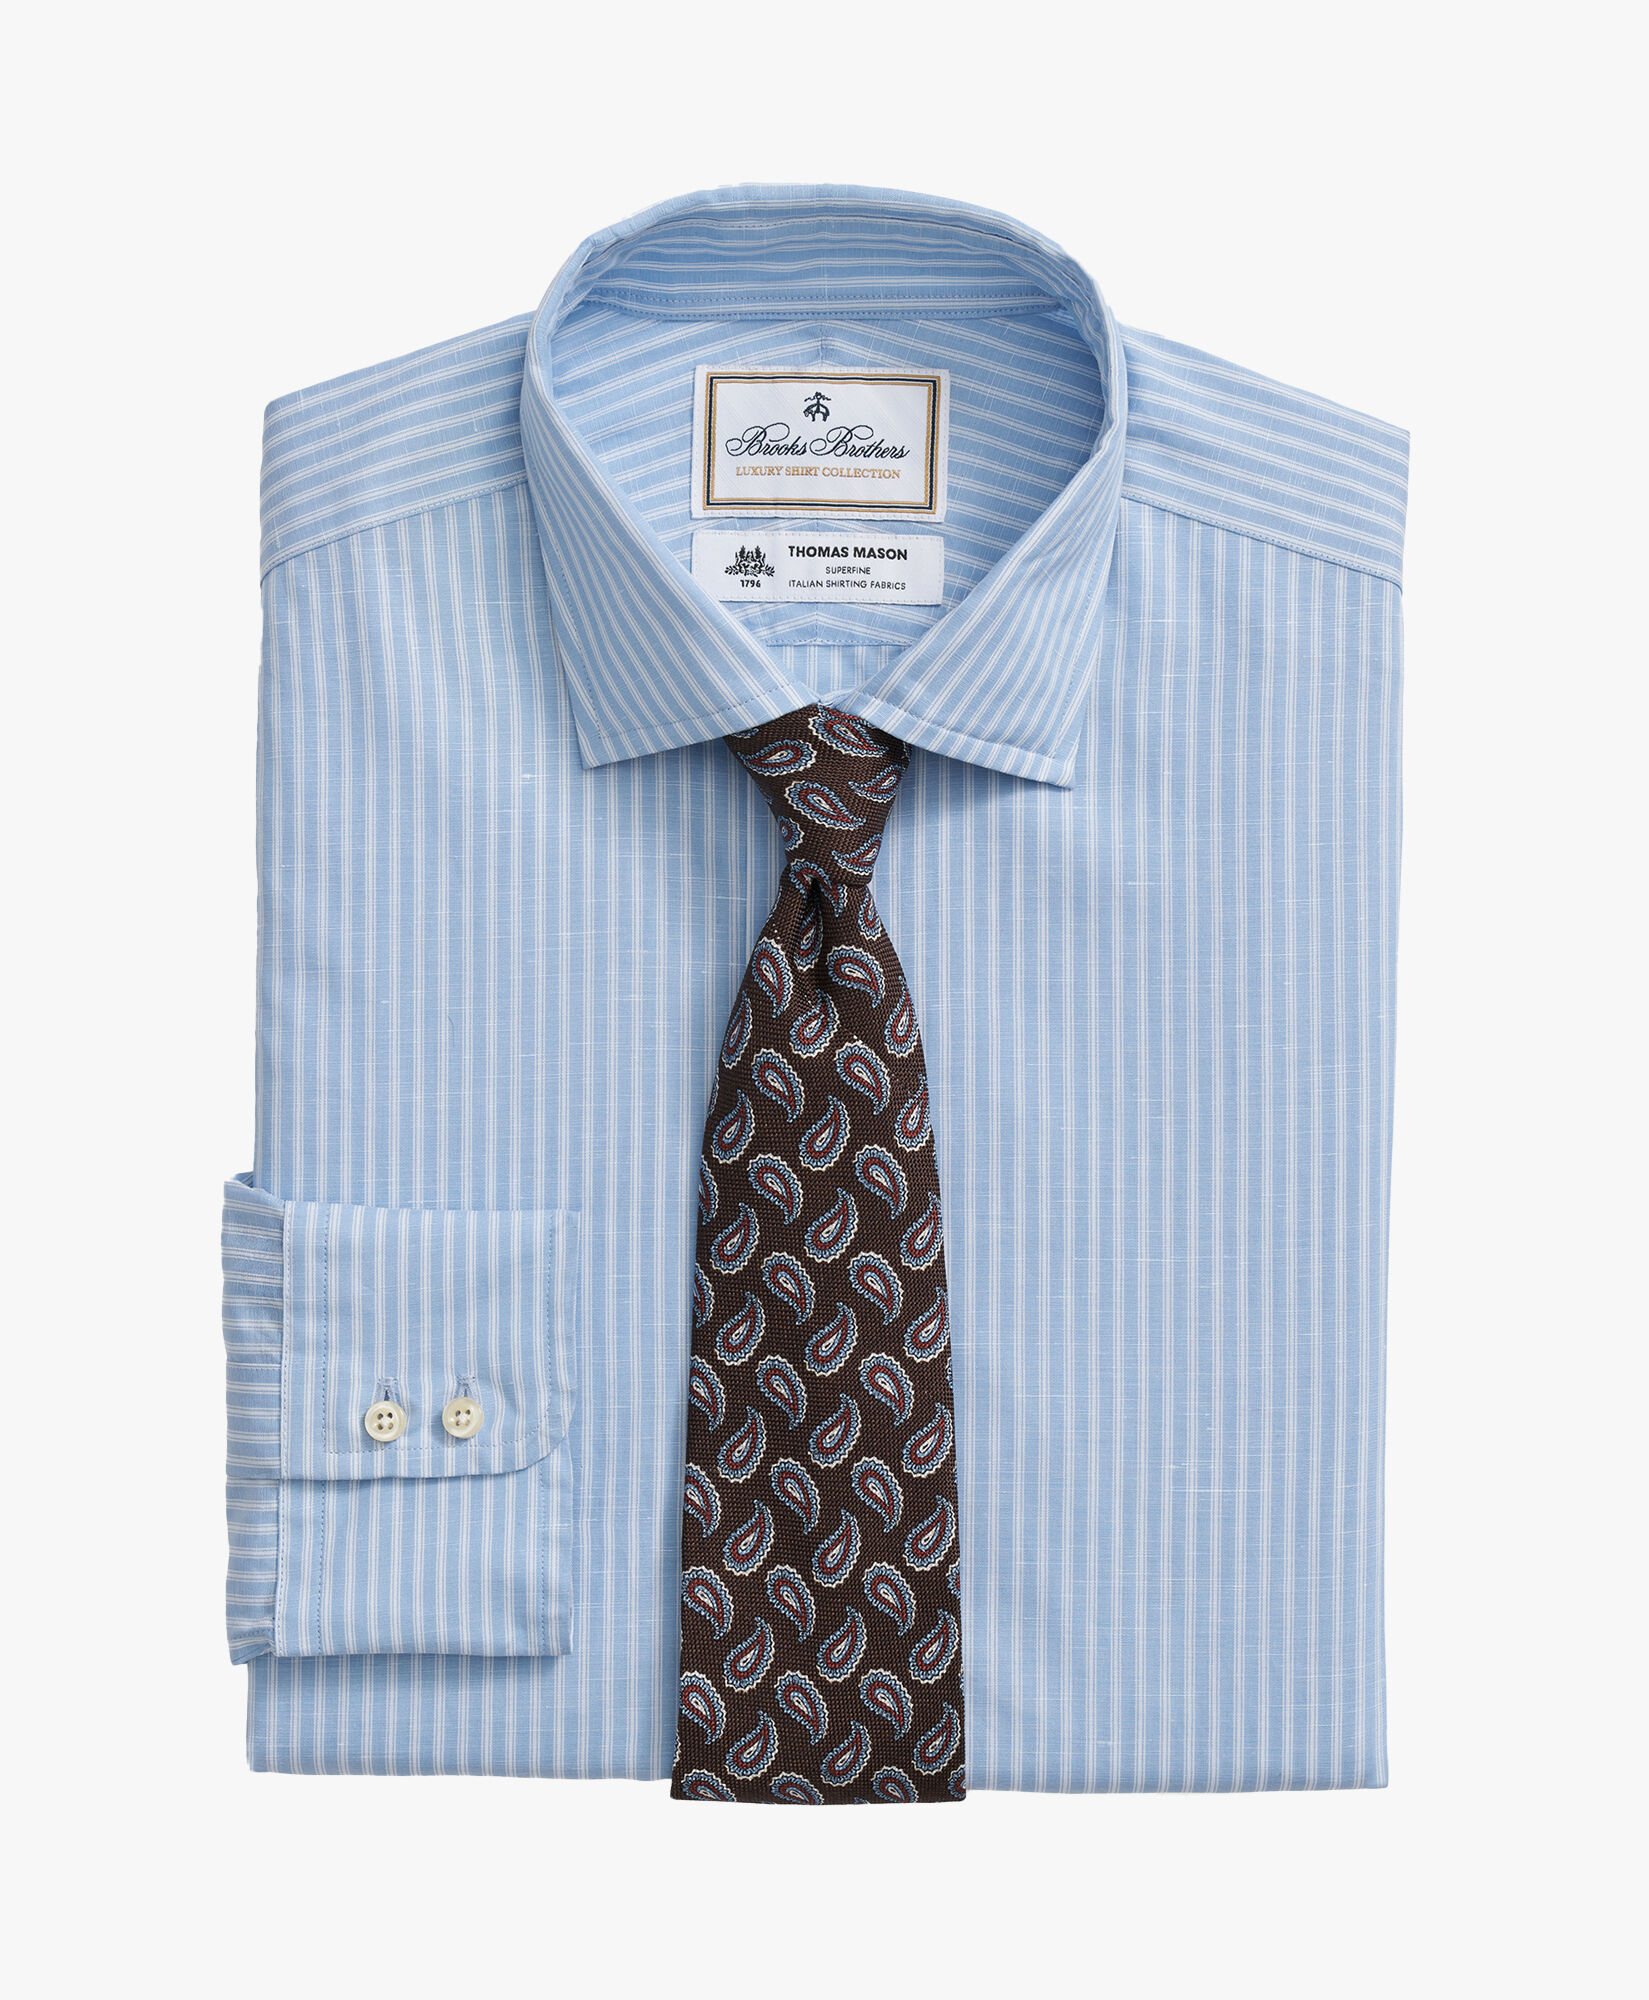 Shop By Fit - Men's Regular Fit Shirts | Brooks Brothers®